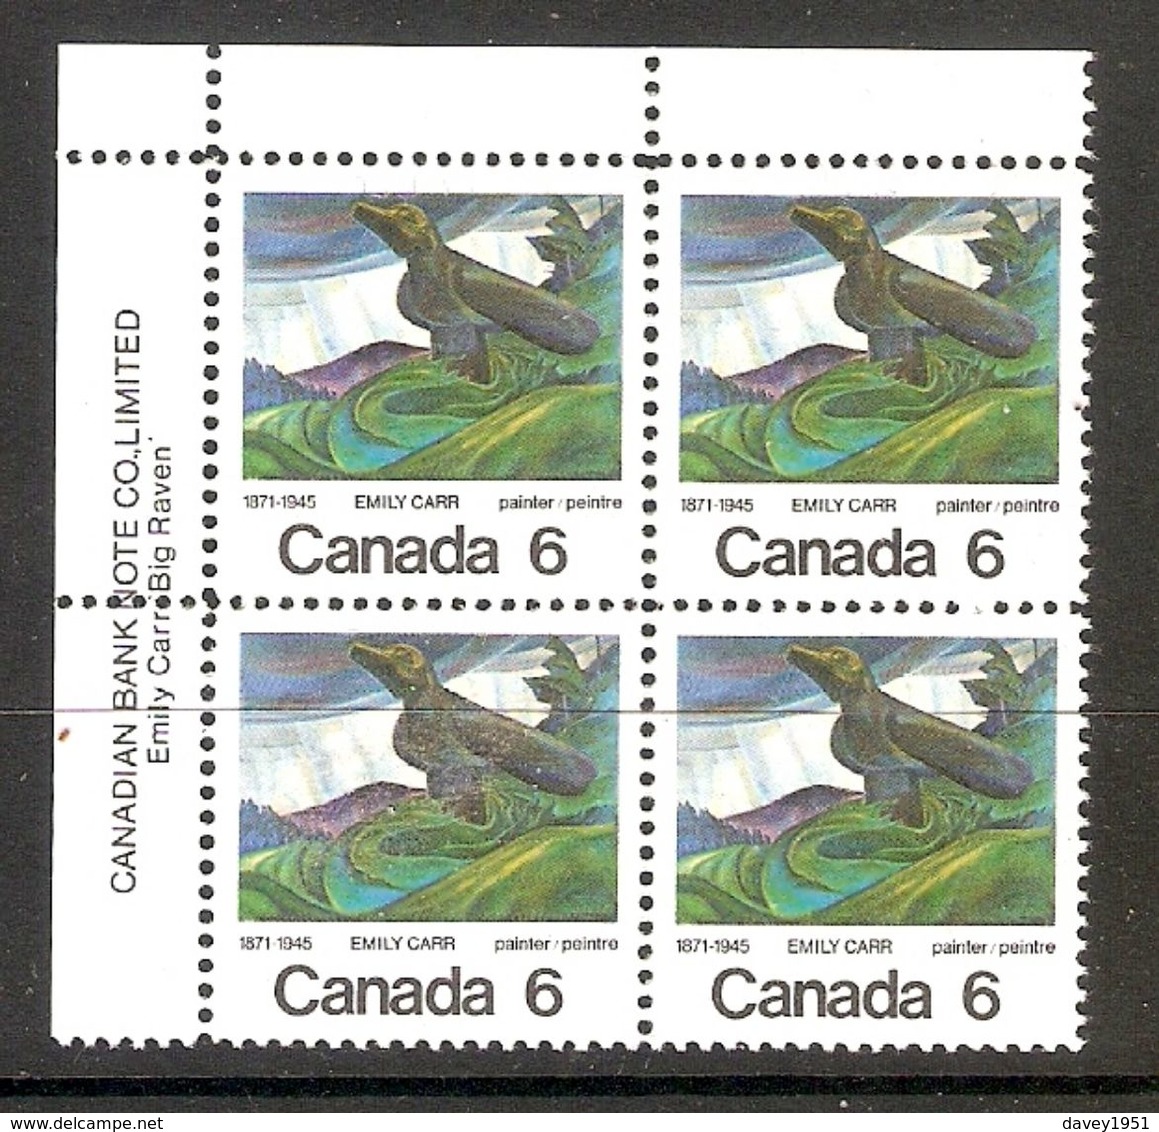 006295 Canada 1971 Emily Carr 6c Plate Block UL MNH - Plate Number & Inscriptions